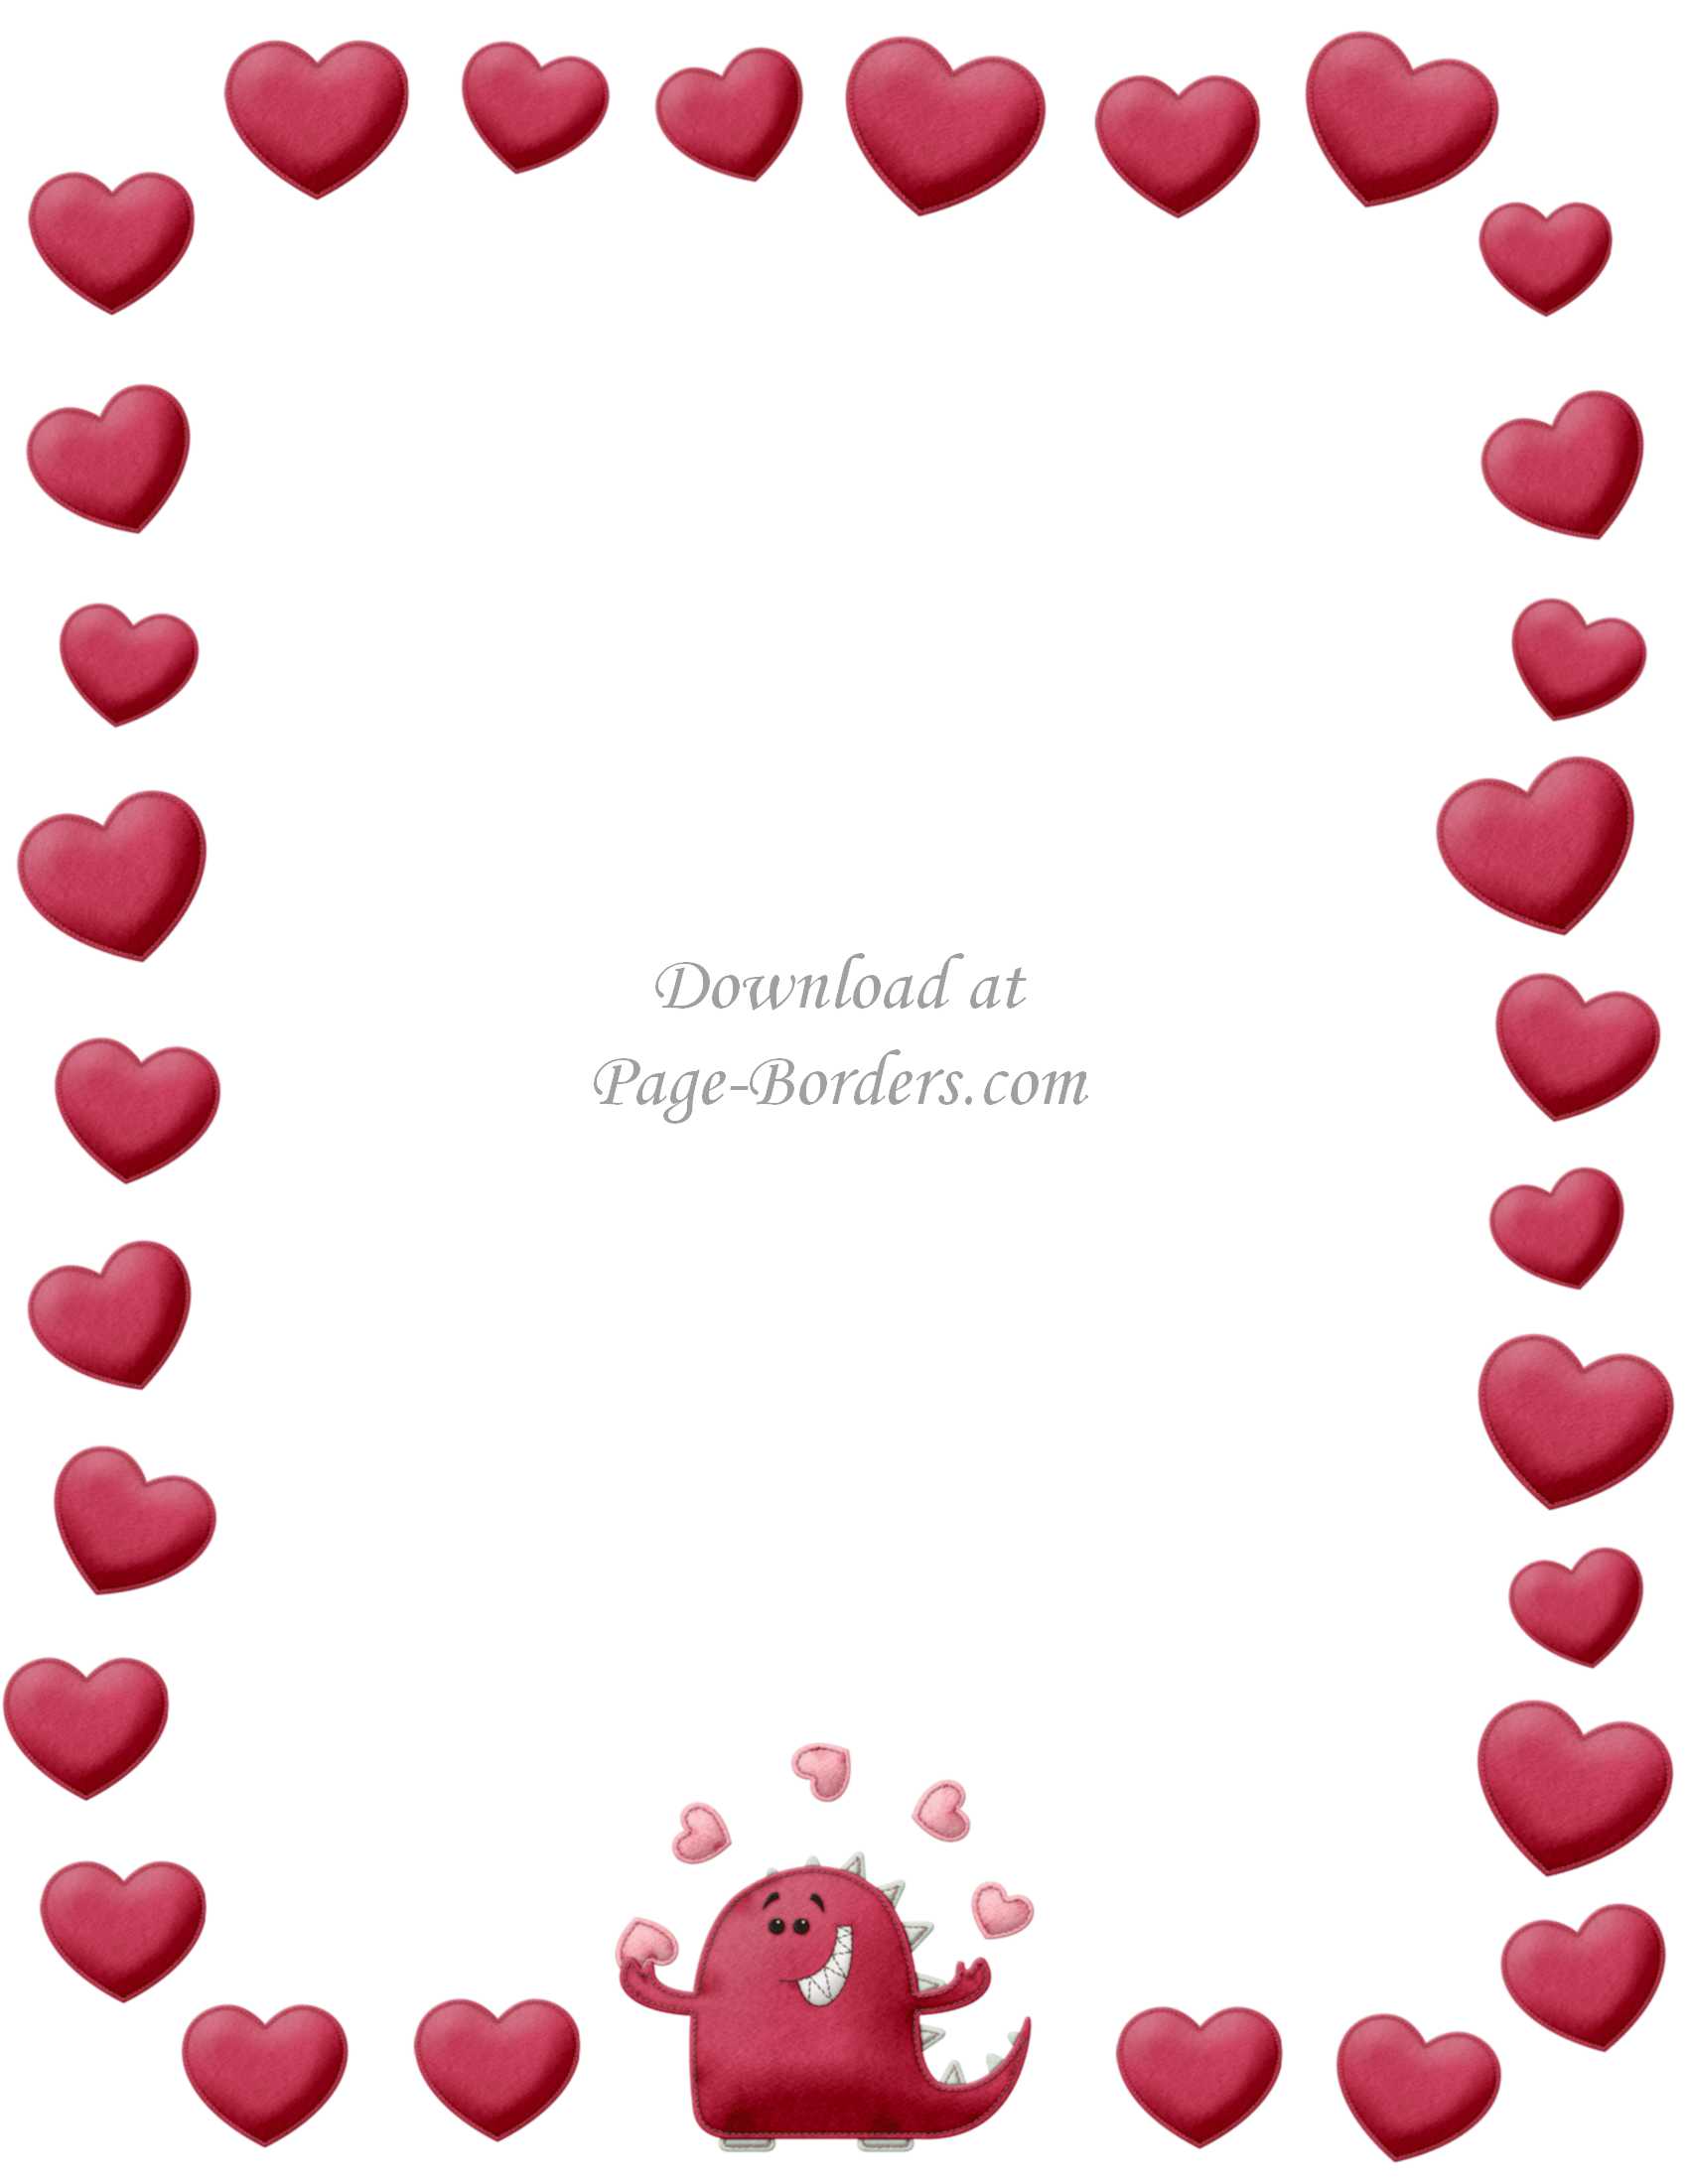 Free Printable Heart Border | Customize online or download as is